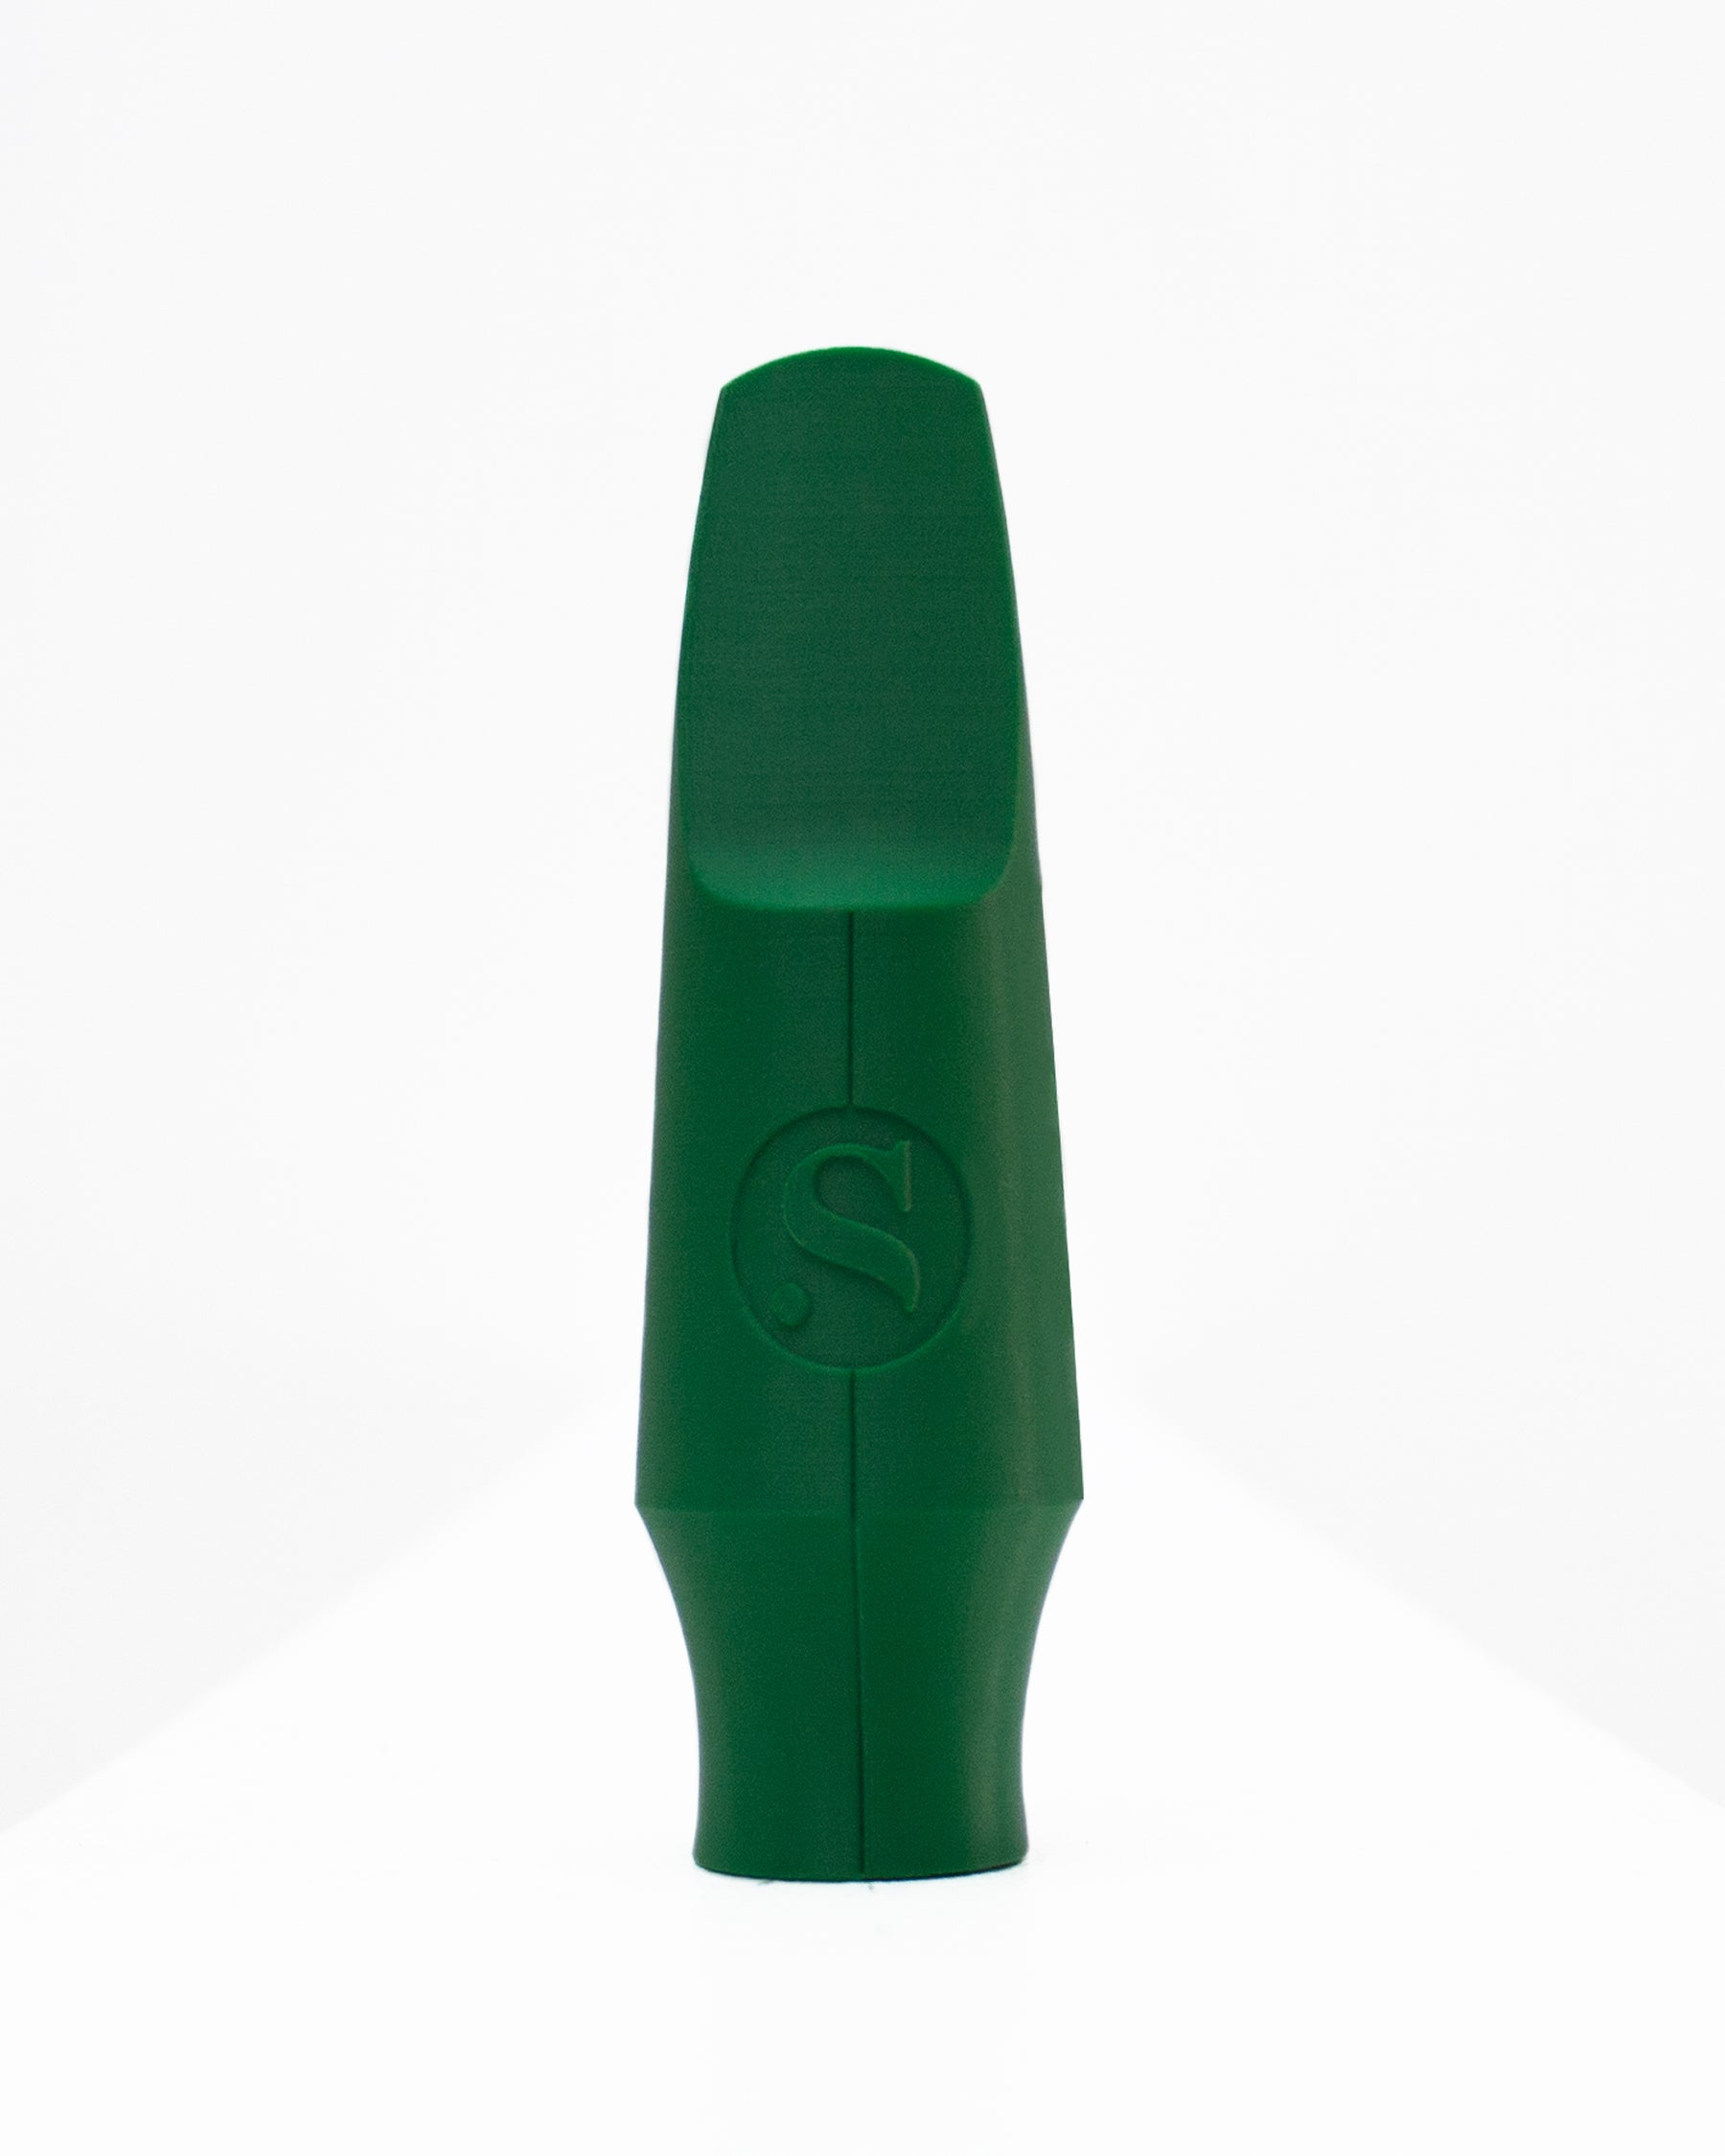 Tenor Originals Saxophone mouthpiece - Steady by Syos - 8 / Forest Green